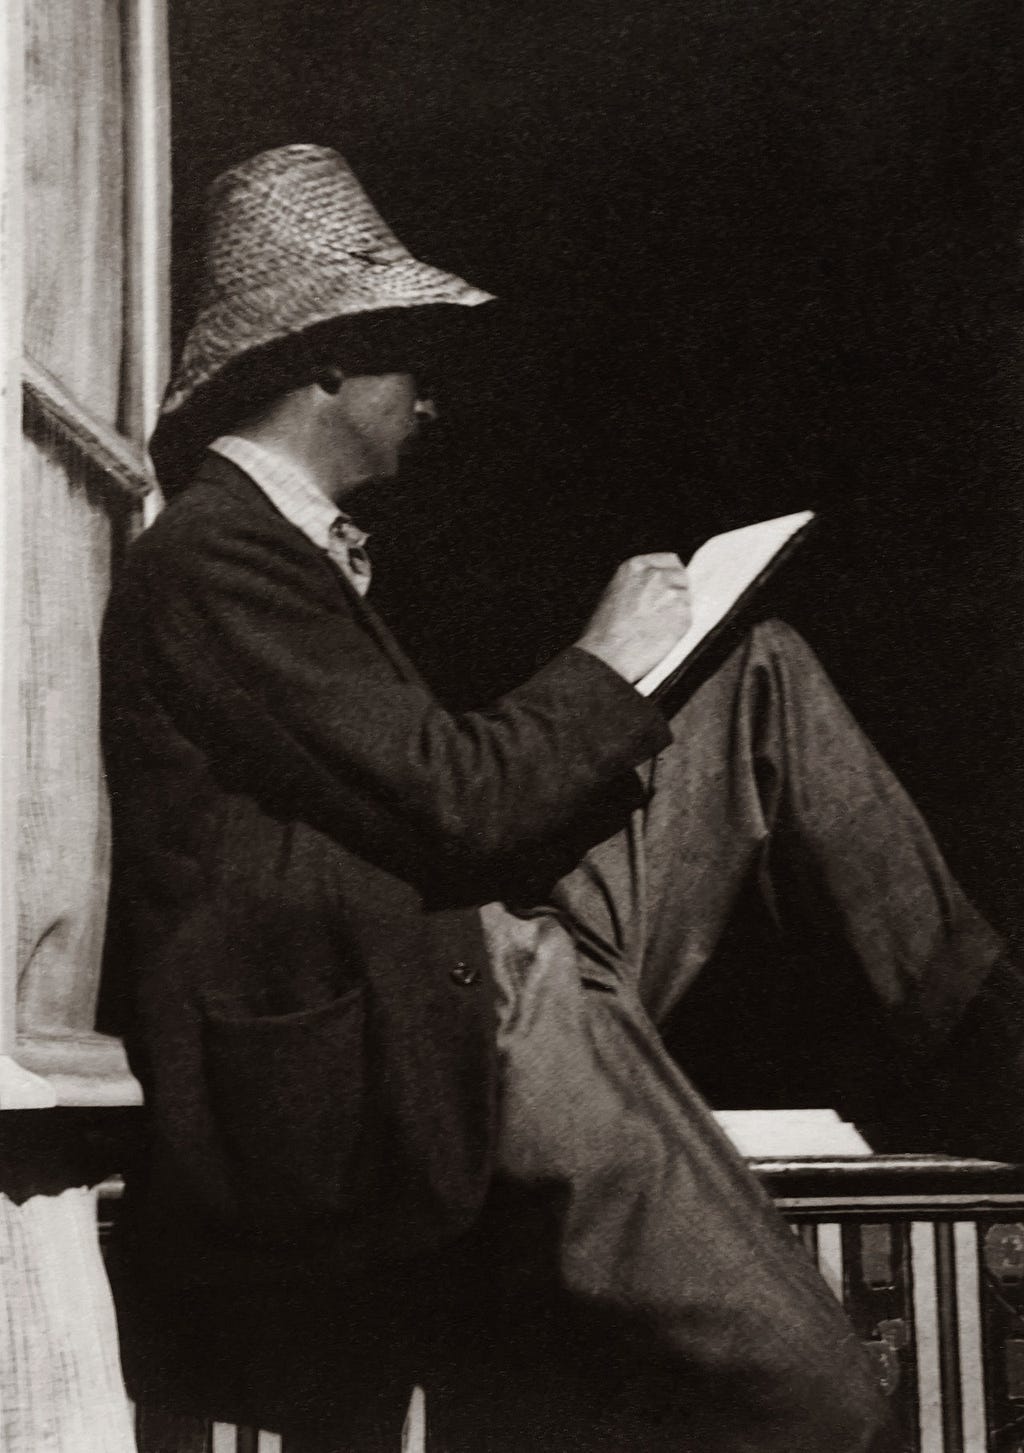 A man sitting on headrails, wearing a hat, and writing on a notebook